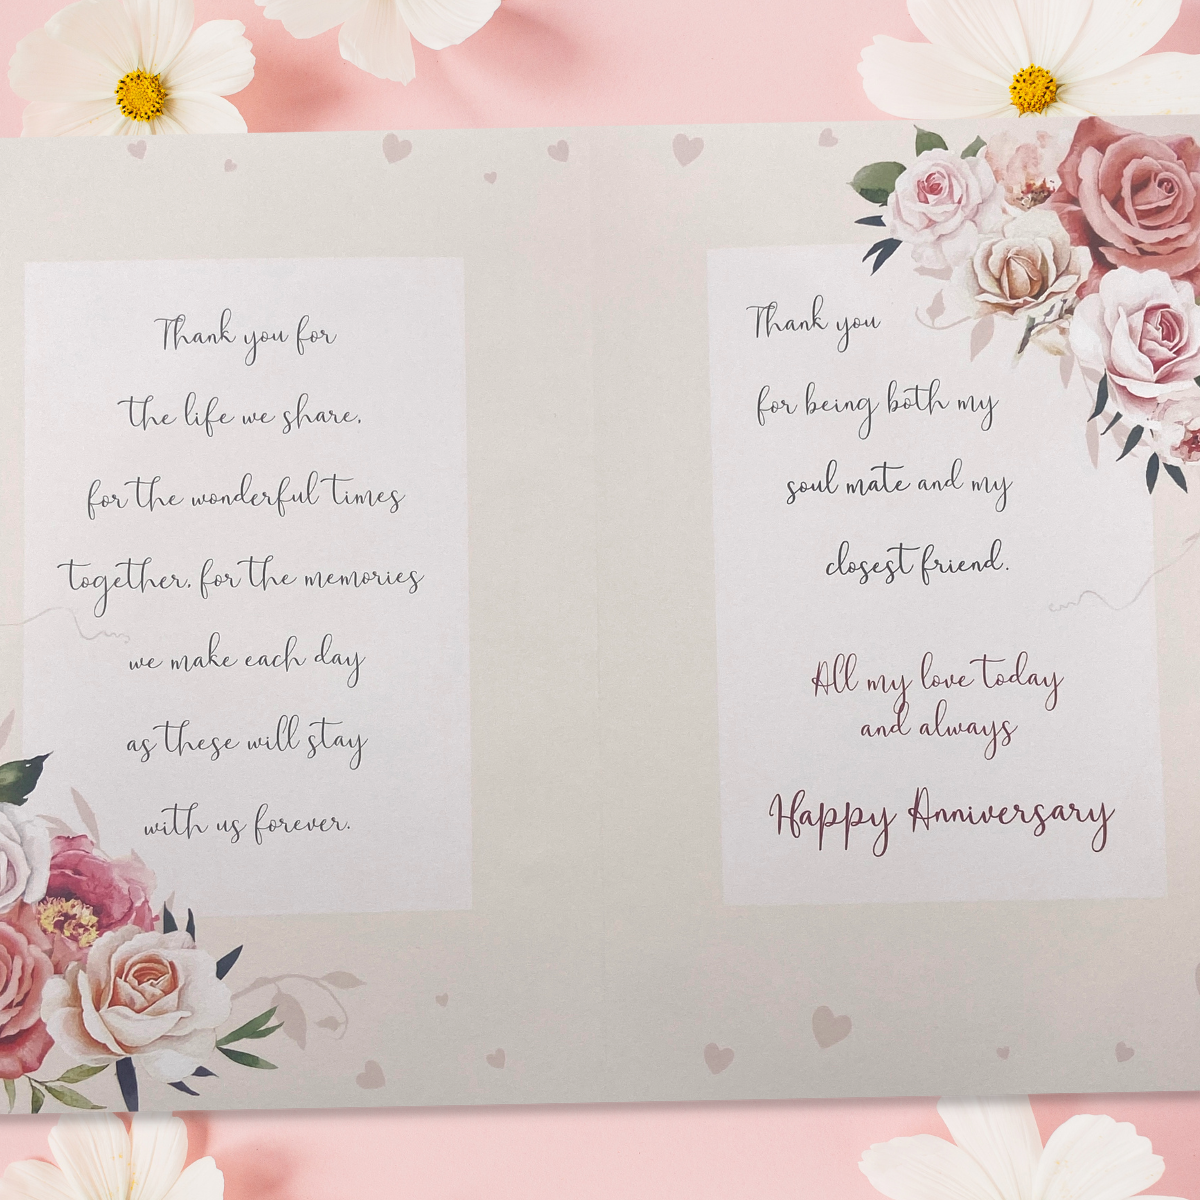 Full colour printed insert with roses and verse